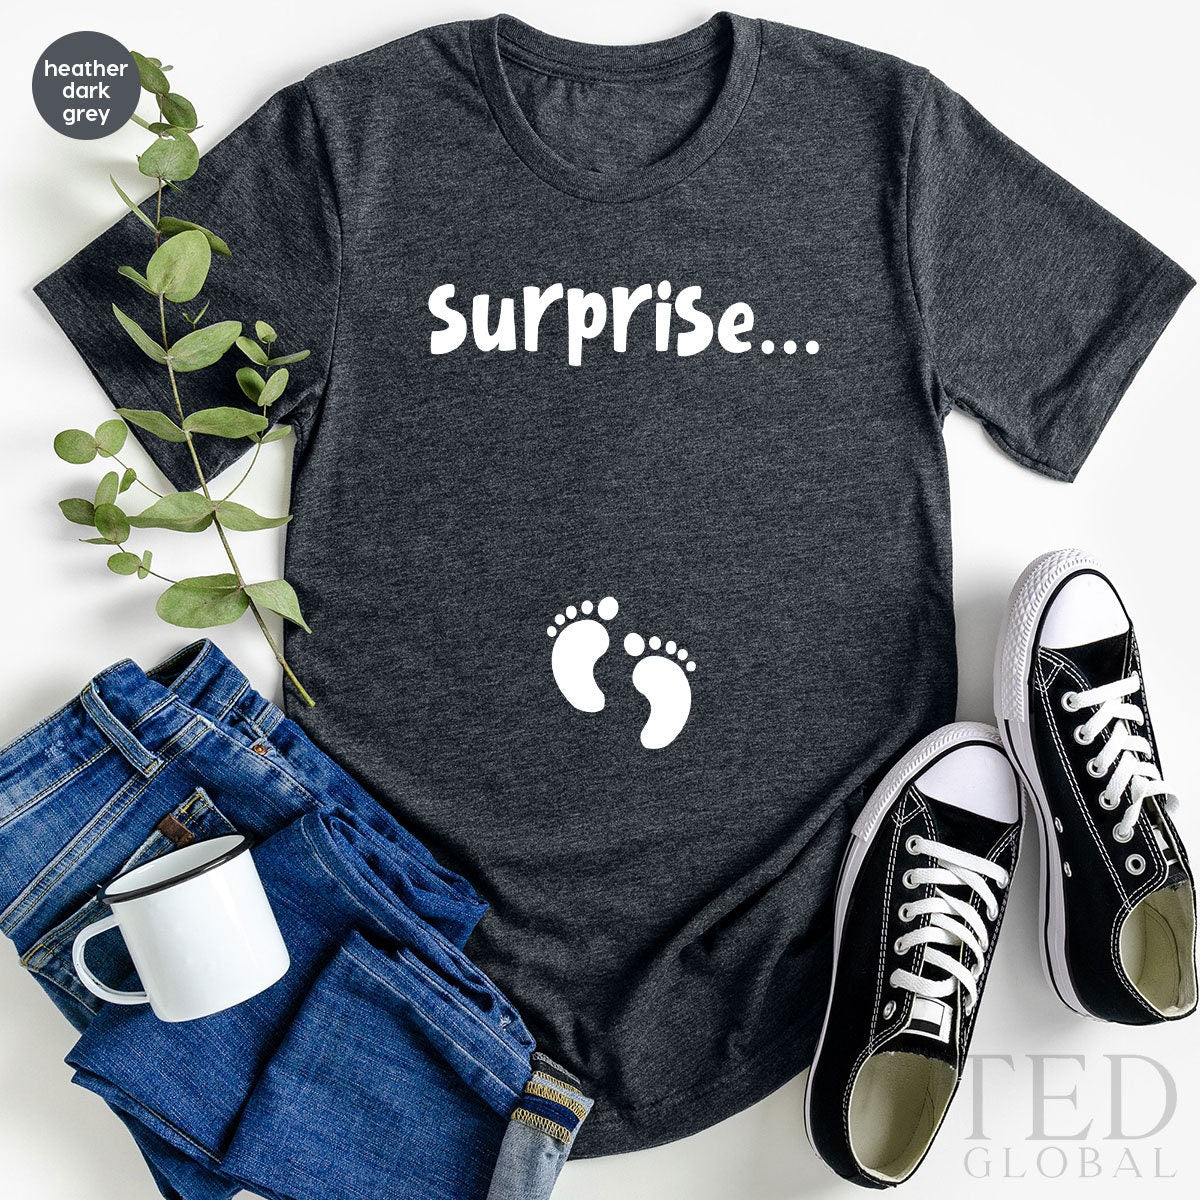 Pregnancy Announcement Shirt, Im Pregnant Shirt, First Mothers Day, Funny Pregnant Shirt,  Baby Shower TShirt, New Mom Gift, Maternity Tee - Fastdeliverytees.com